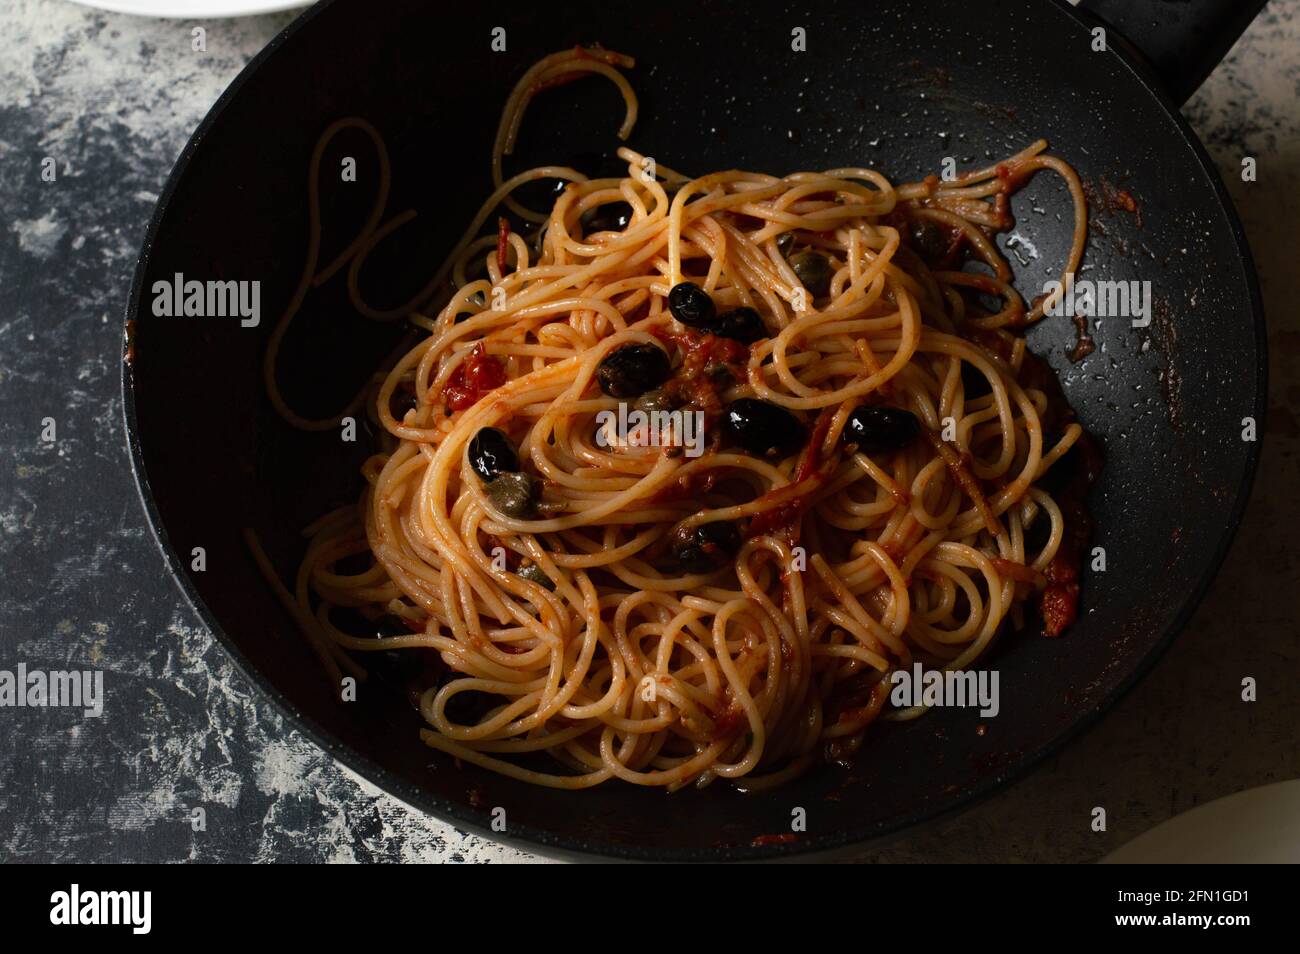 Puttanesca pasta: famous italian pasta with black olive and red tomatoes sauce Stock Photo